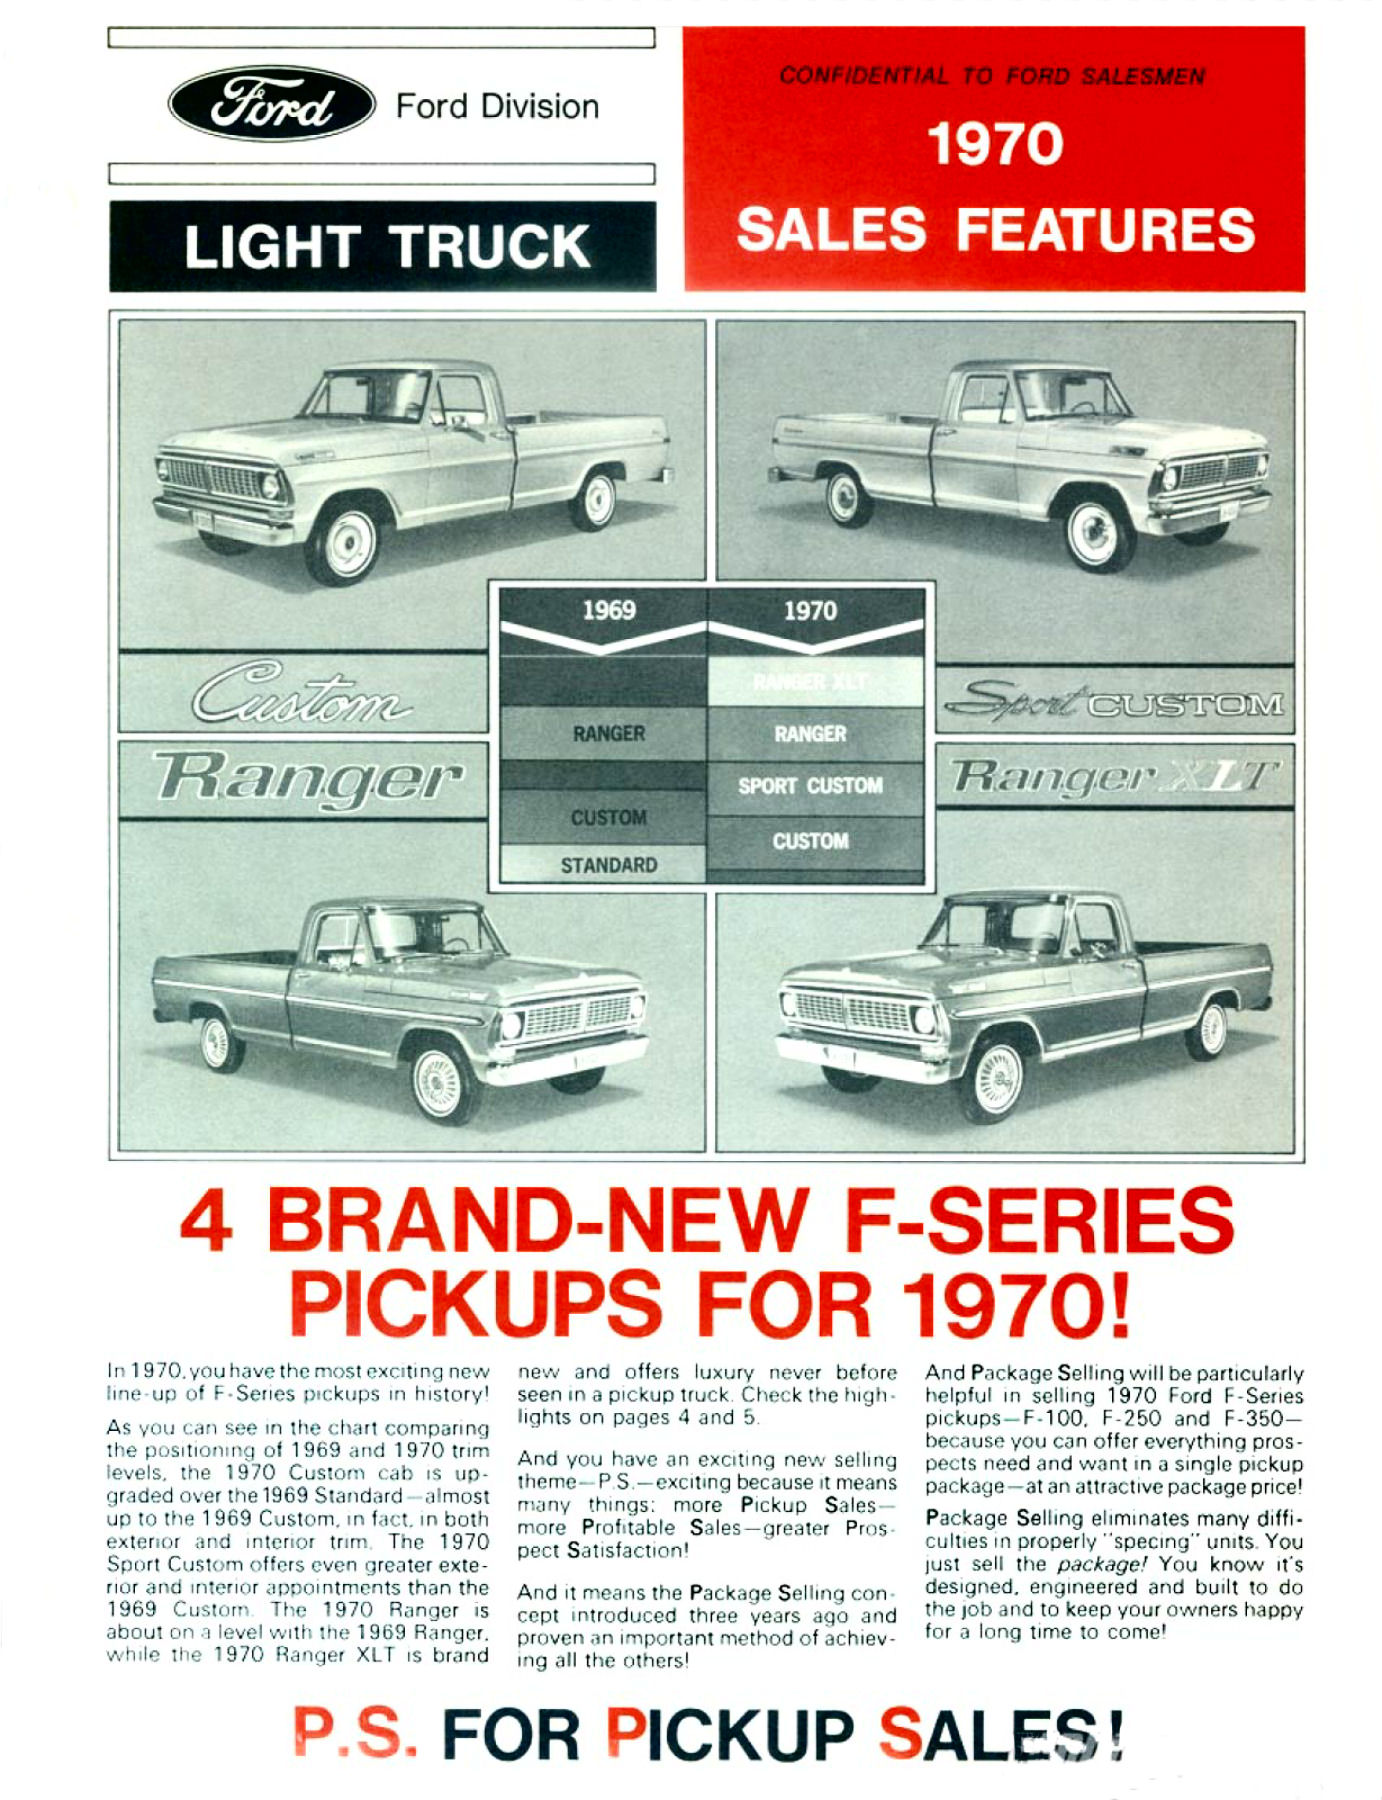 1970 Ford Light Truck Sales Features-01